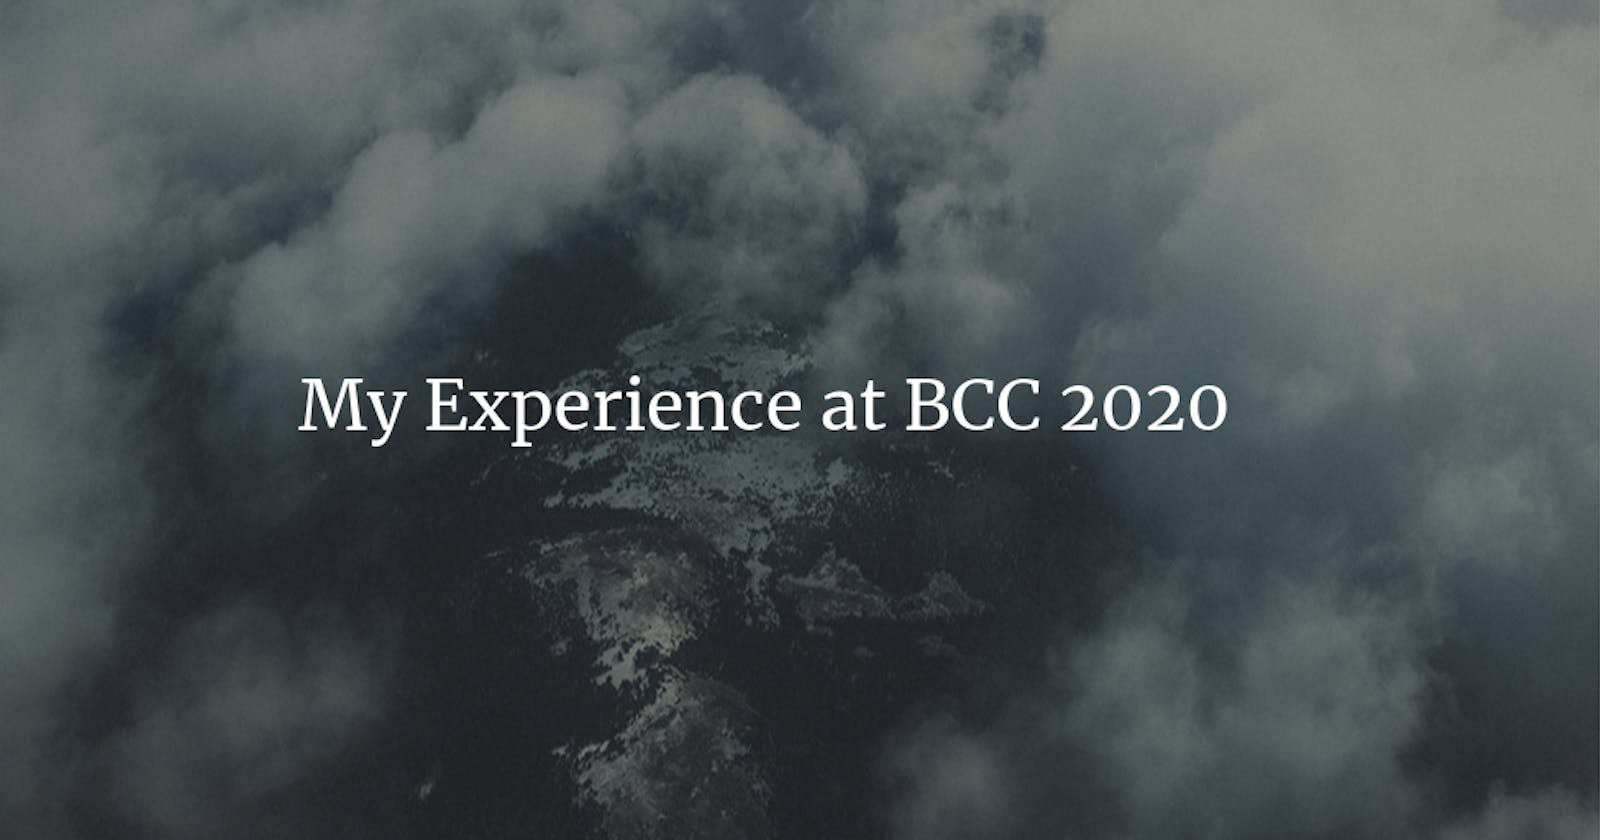 My Experience at BCC 2020